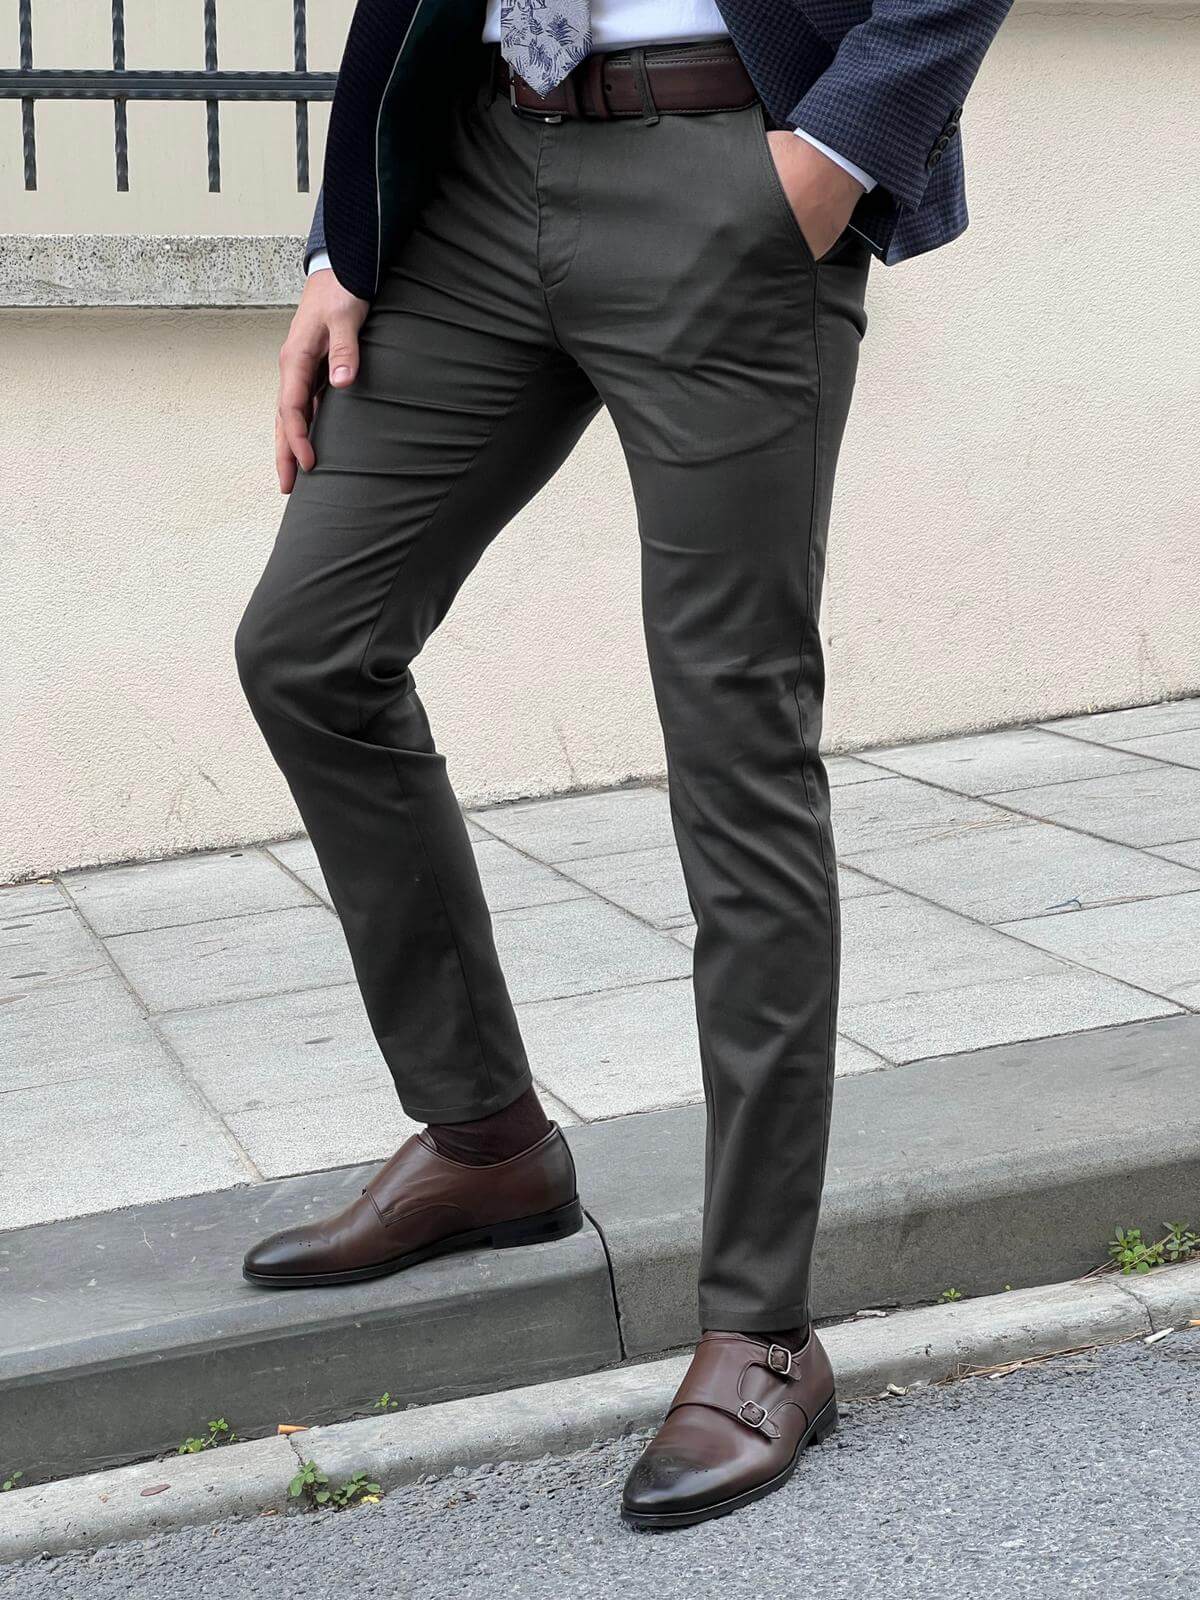 Stylish male model confidently presenting classic khaki pants with a modern twist, exuding sophistication and versatility in fashion.